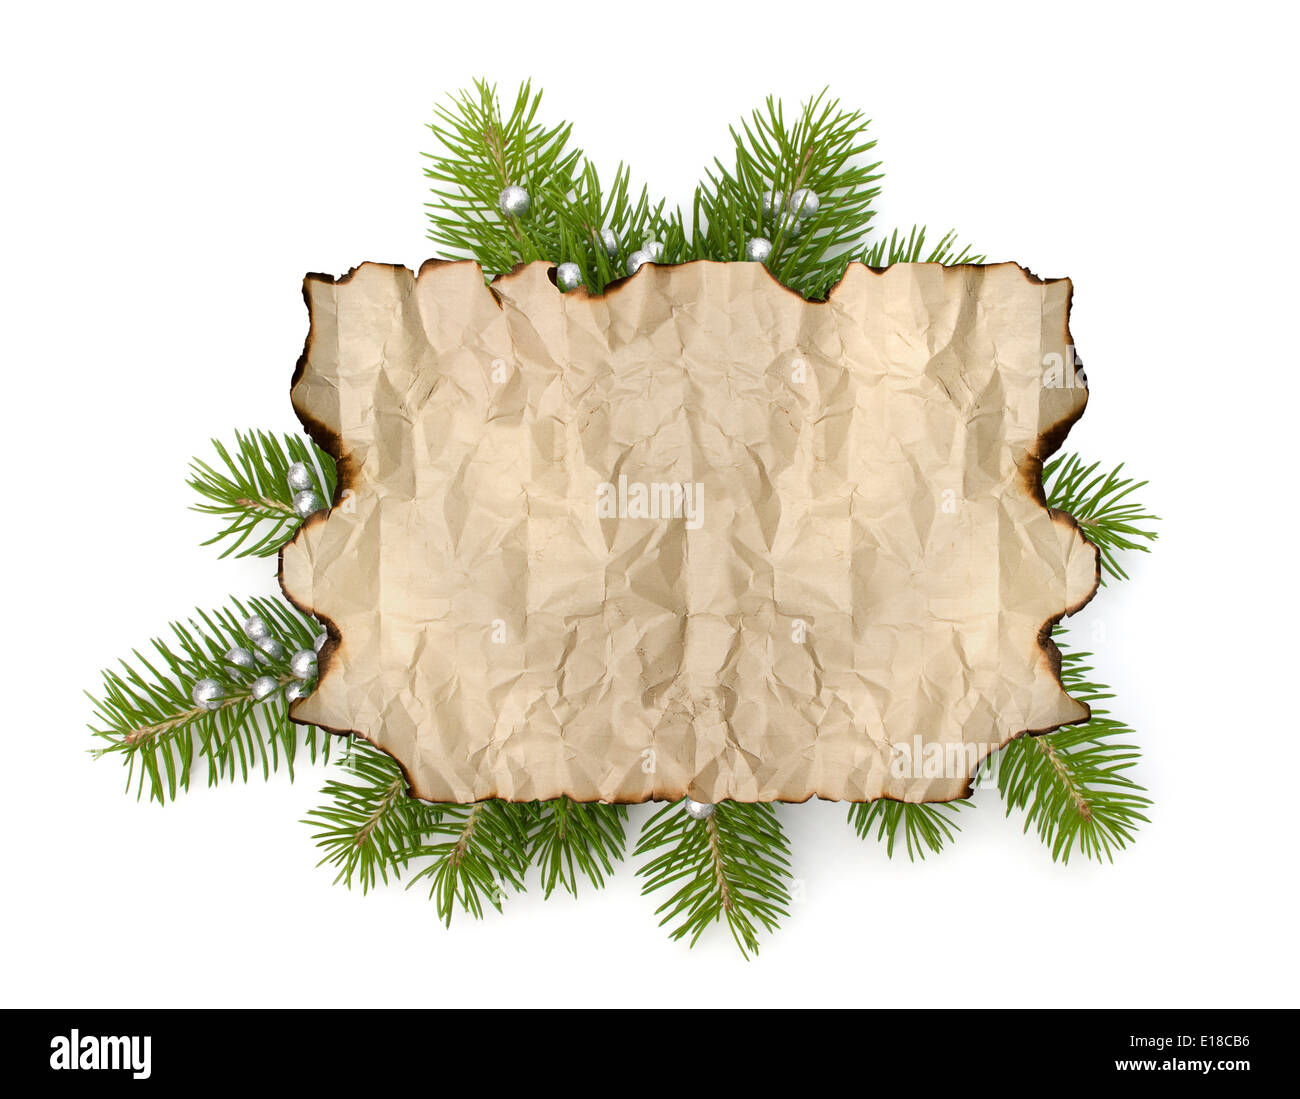 https://c8.alamy.com/comp/E18CB6/old-parchment-paper-with-copy-space-on-christmas-tree-branch-background-E18CB6.jpg